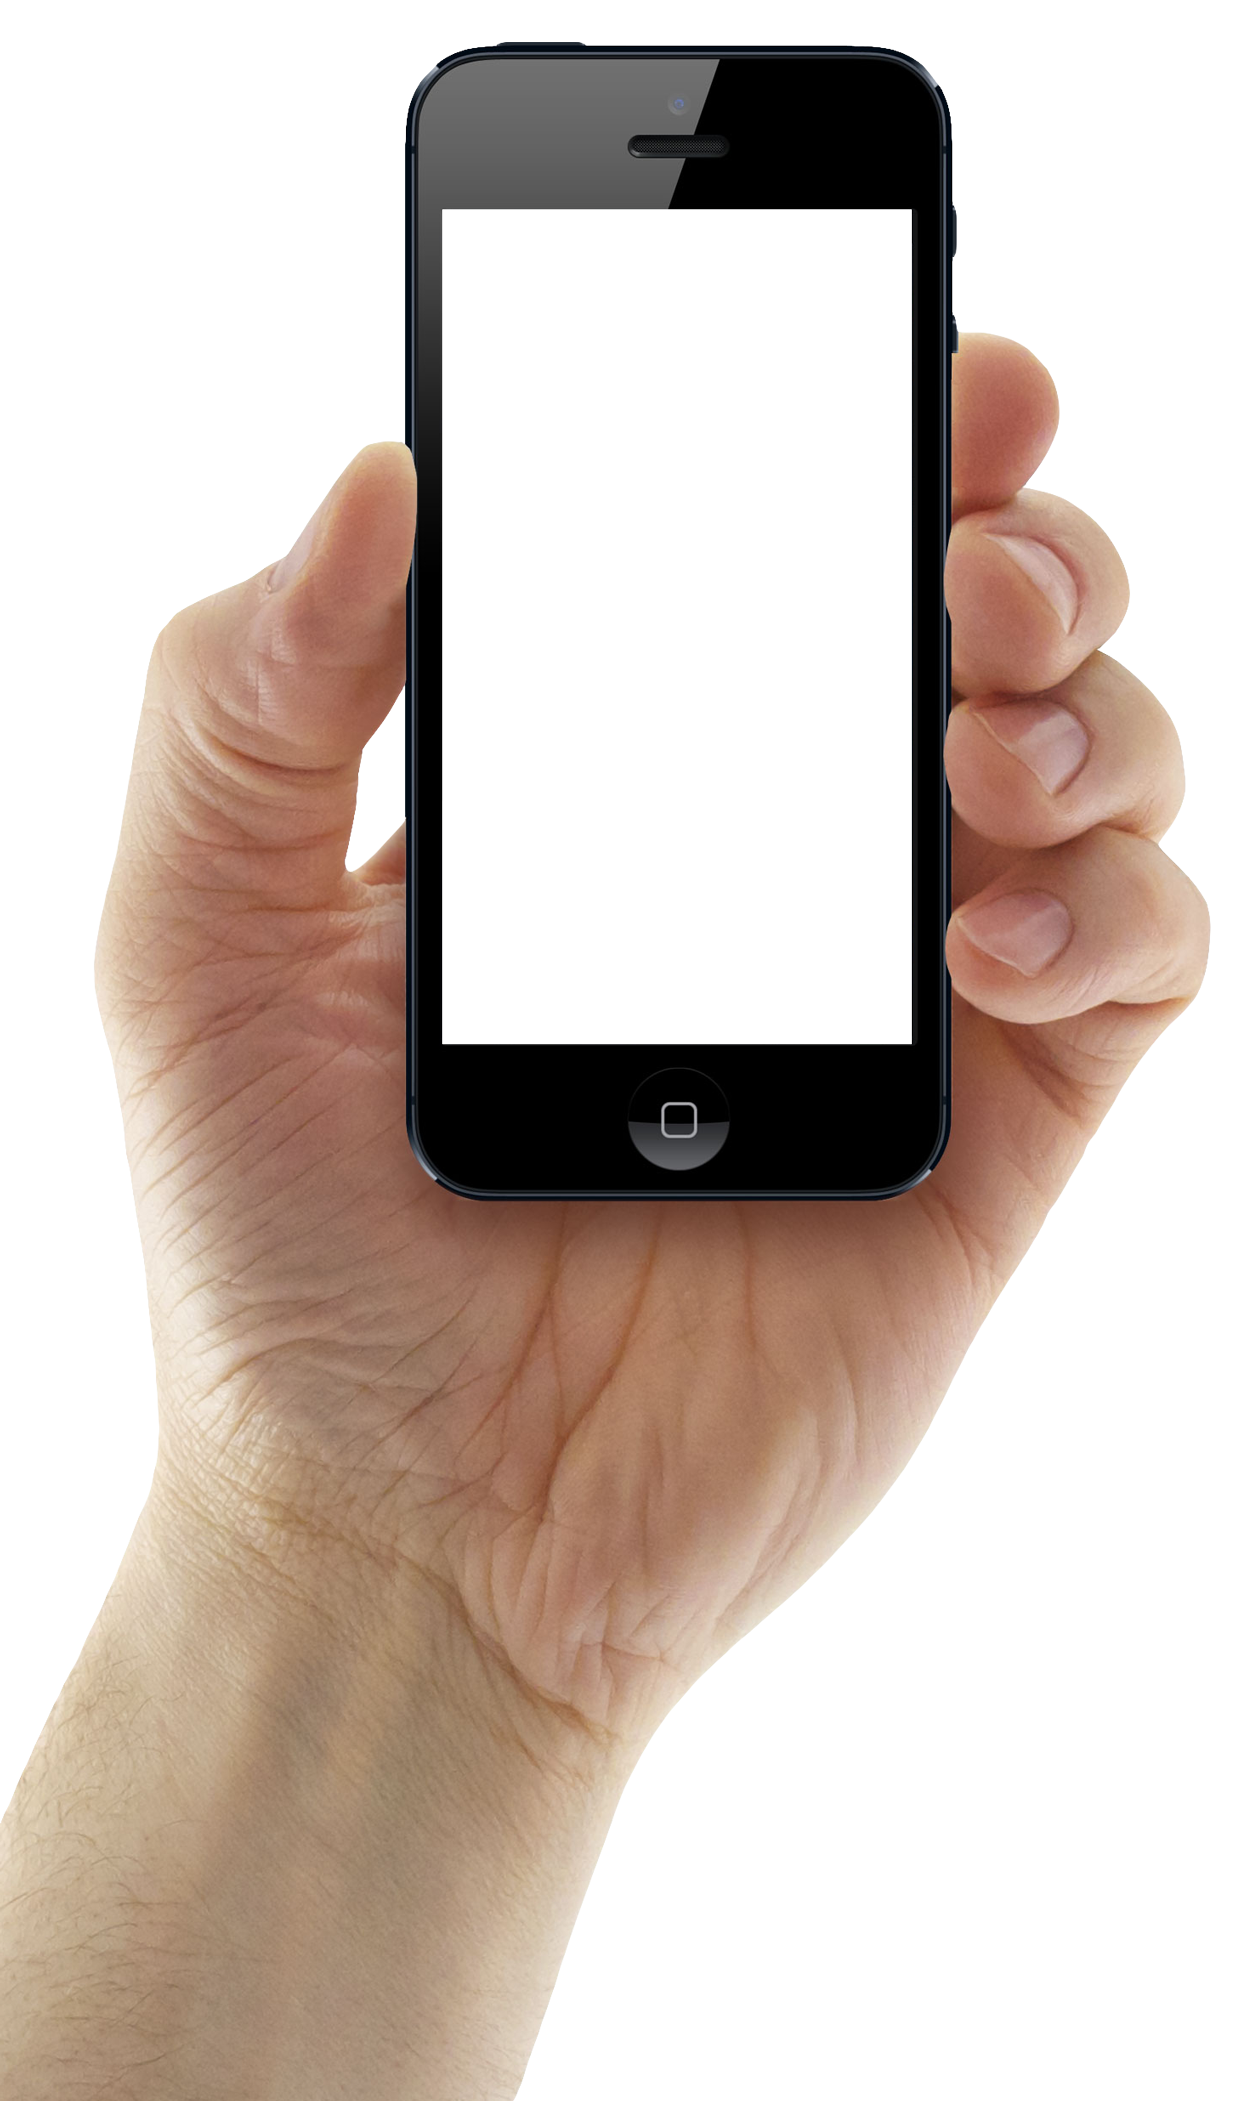 Smartphone Mobile App Hand Iphonepng Holding Pngpix PNG Image